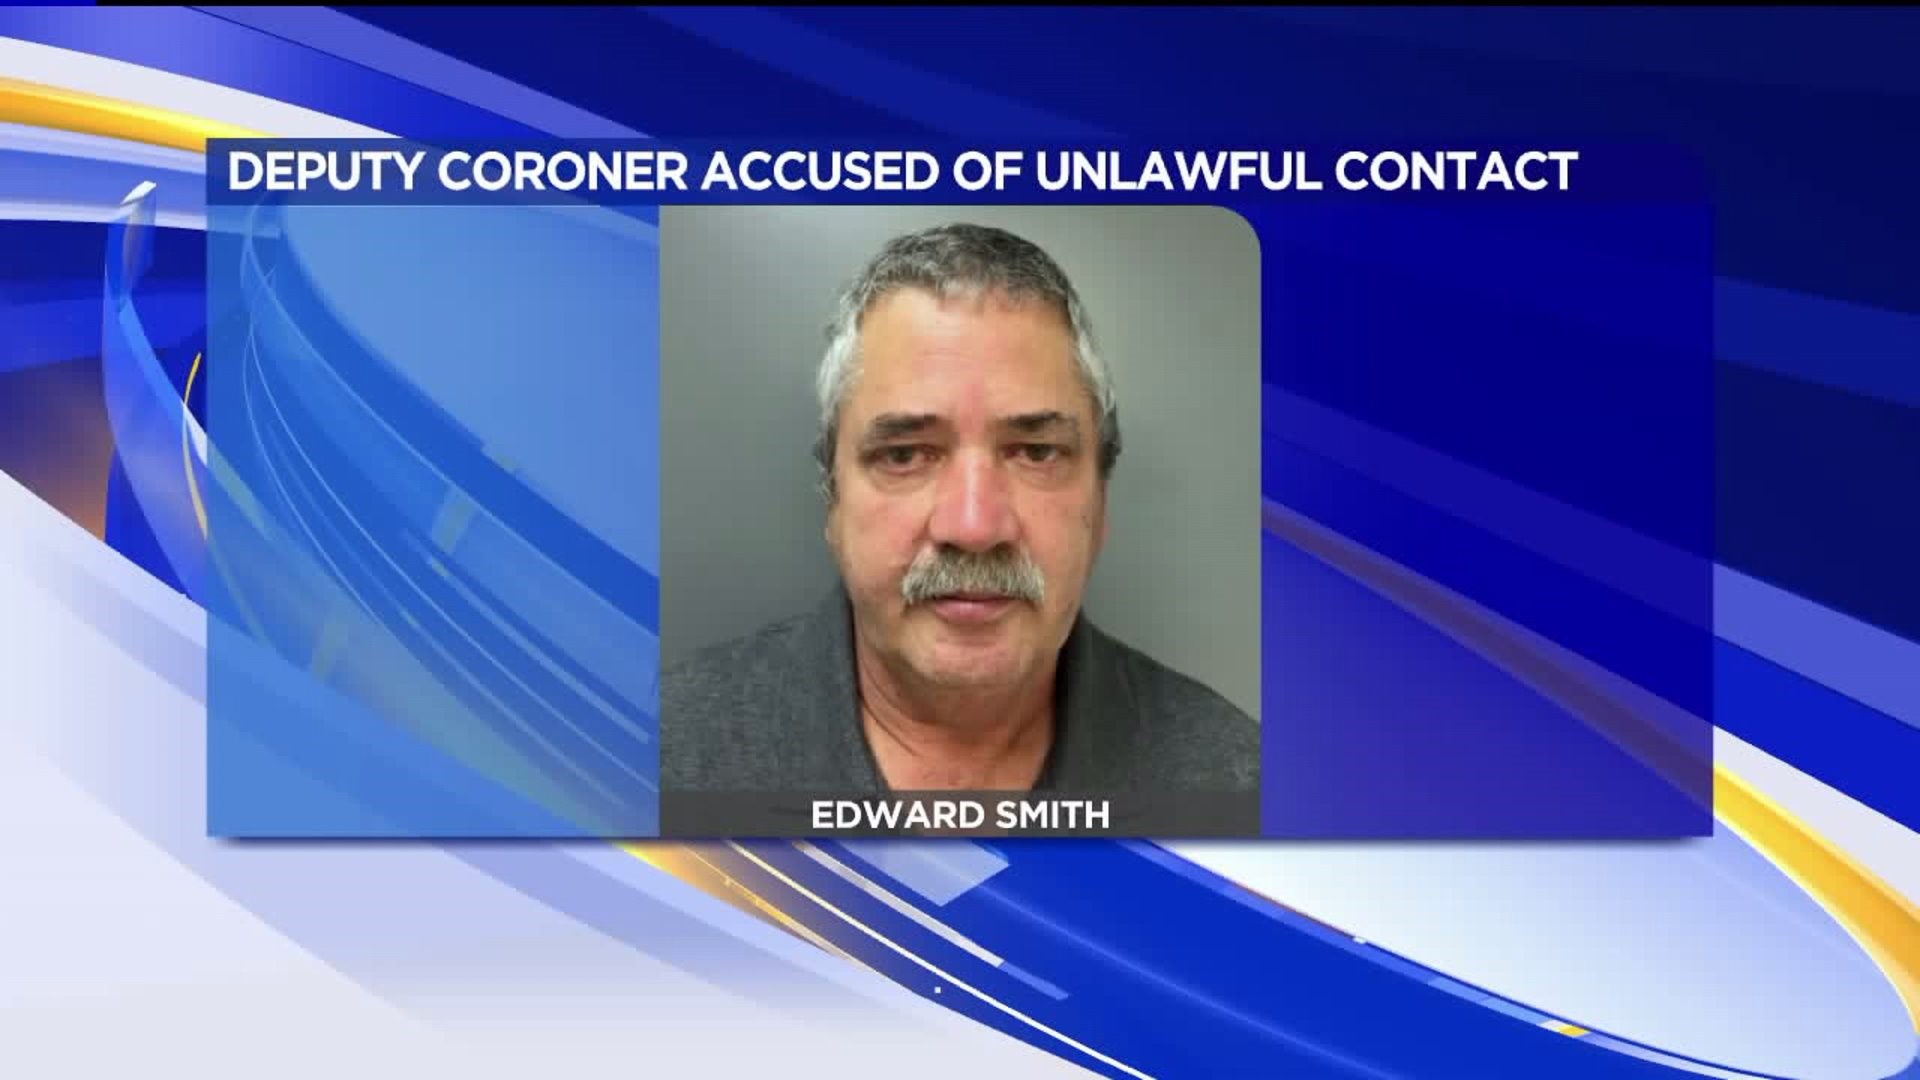 More Child Sex Charges for Deputy Coroner